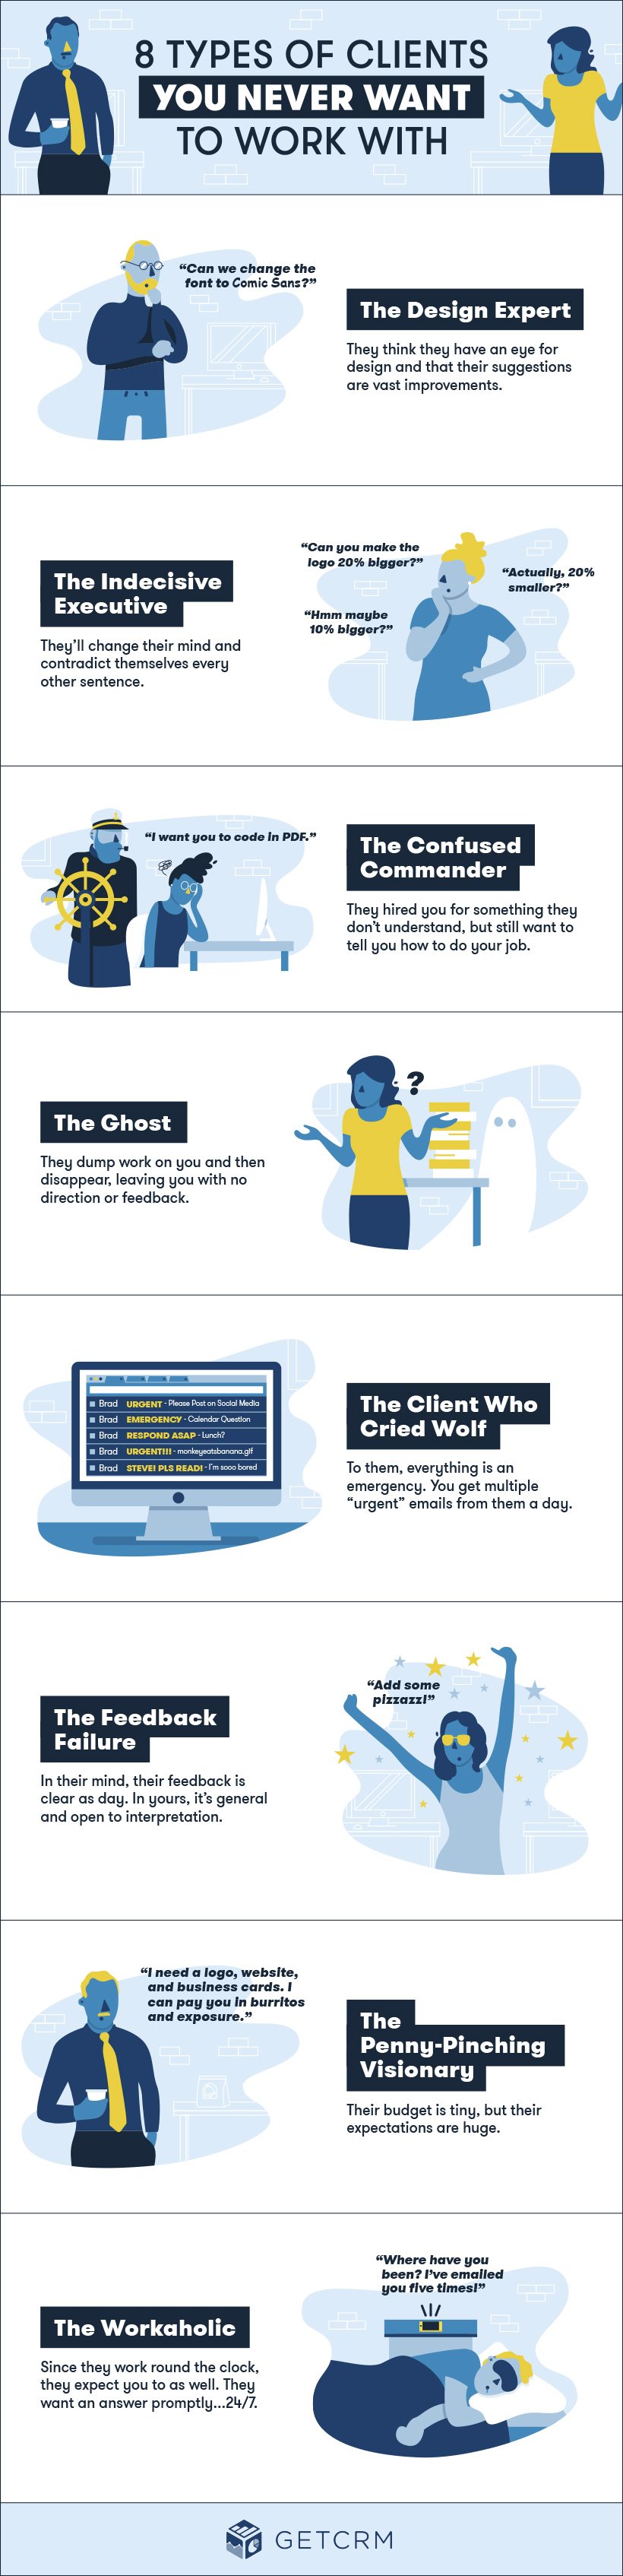 8-Types-of-Client-Web-Designers-Hate-Are-You-One-of-Them-1